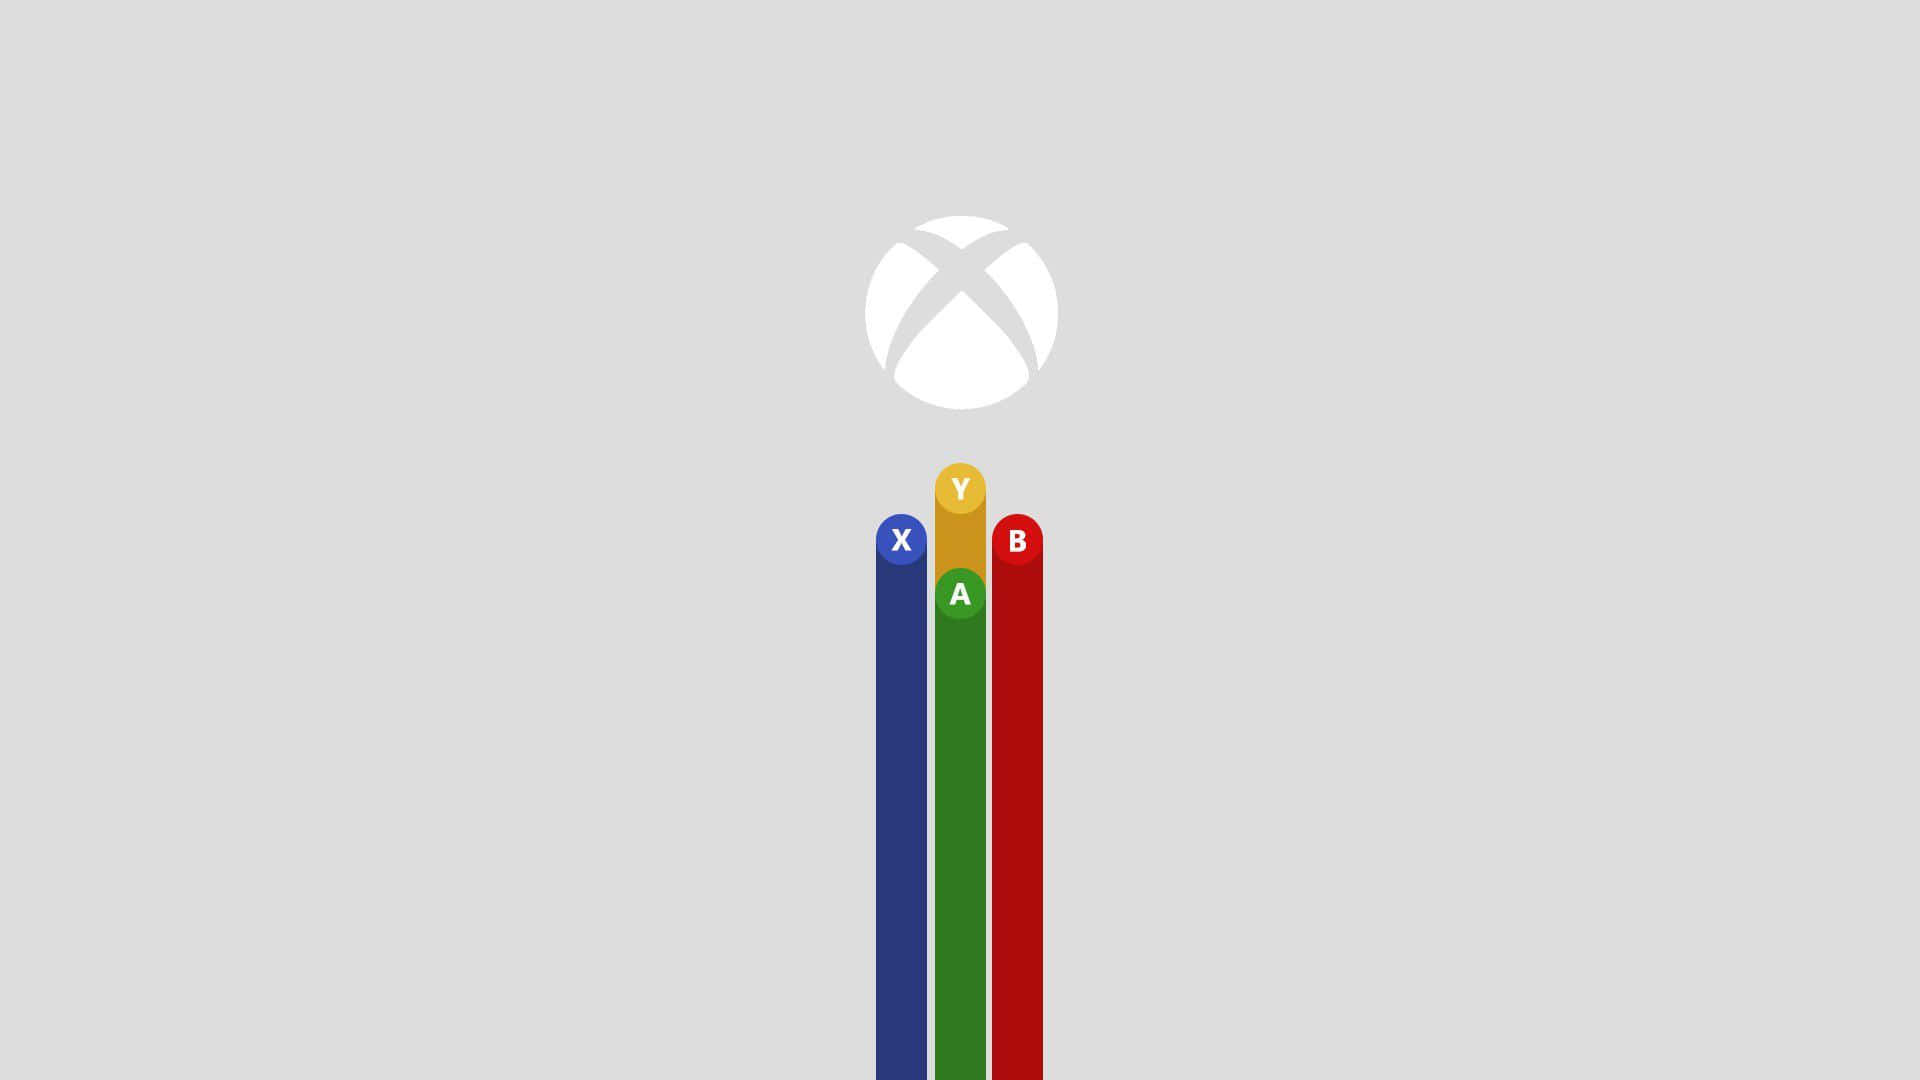 Enjoy playing on the latest Xbox console. Wallpaper